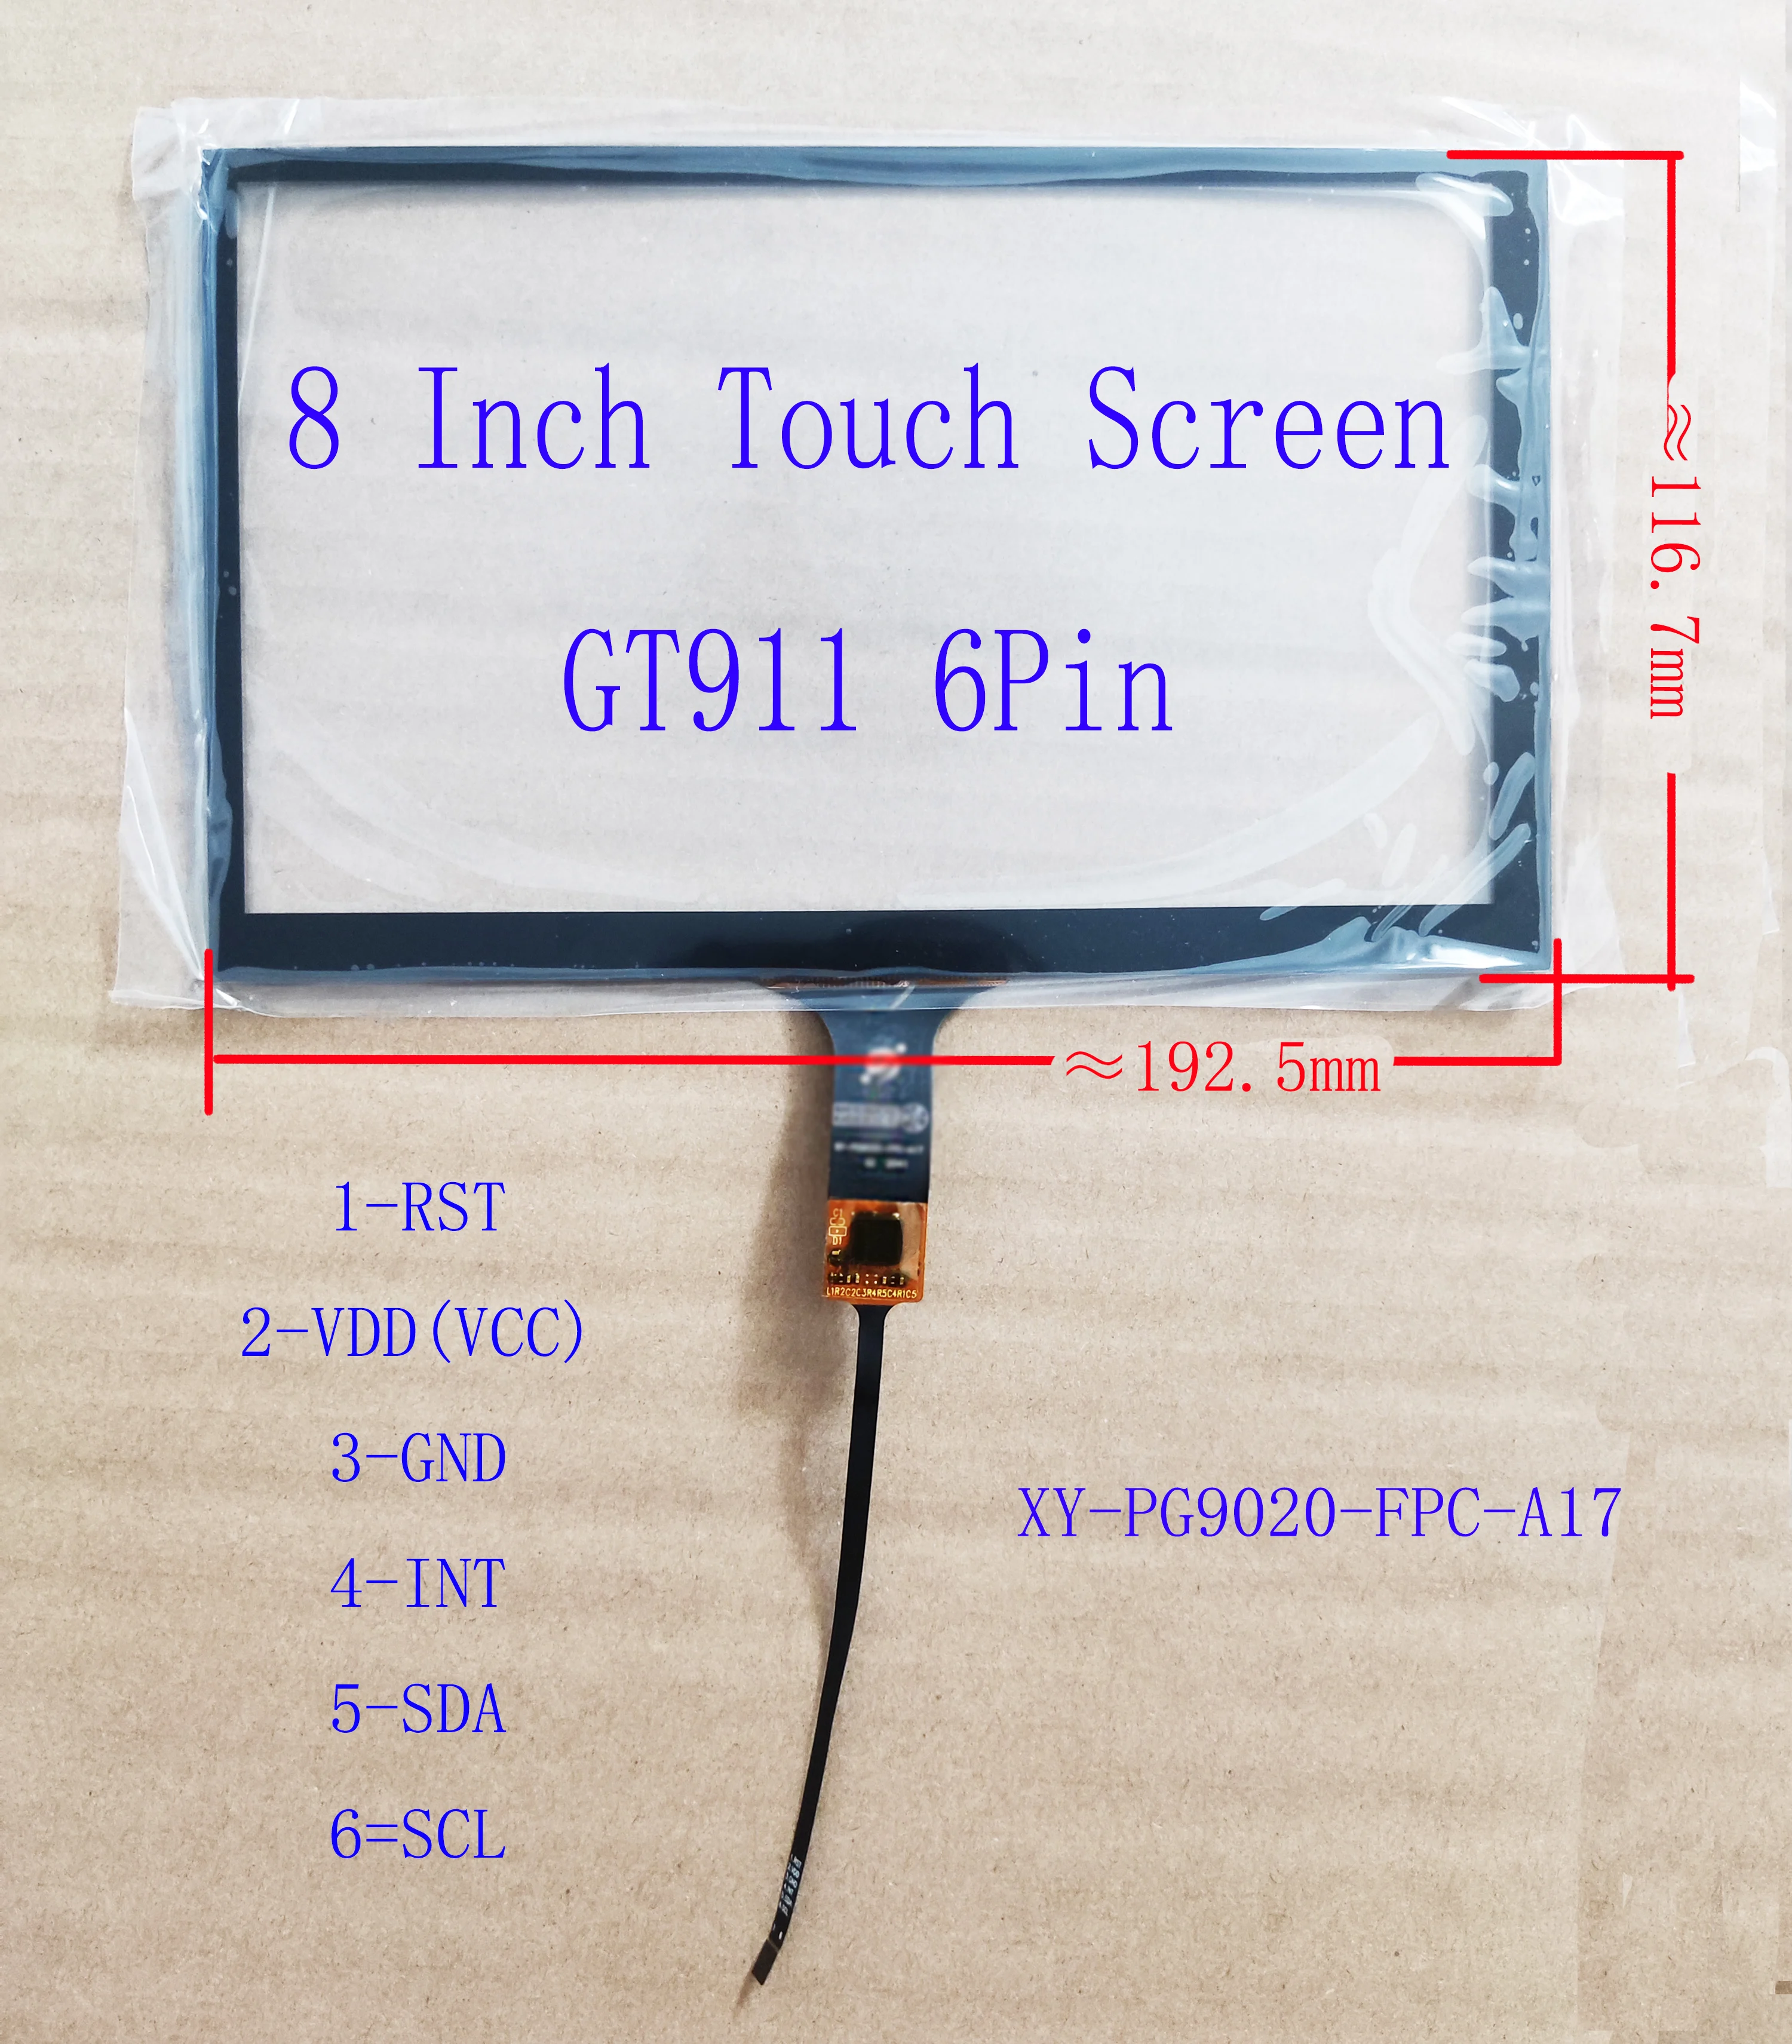 

8 Inch Touch Screen Digitizer Sensor Handwriter Glass Panel For Radio GT911 6Pin 193*117mm 192*116mm XY-PG9020 FPC